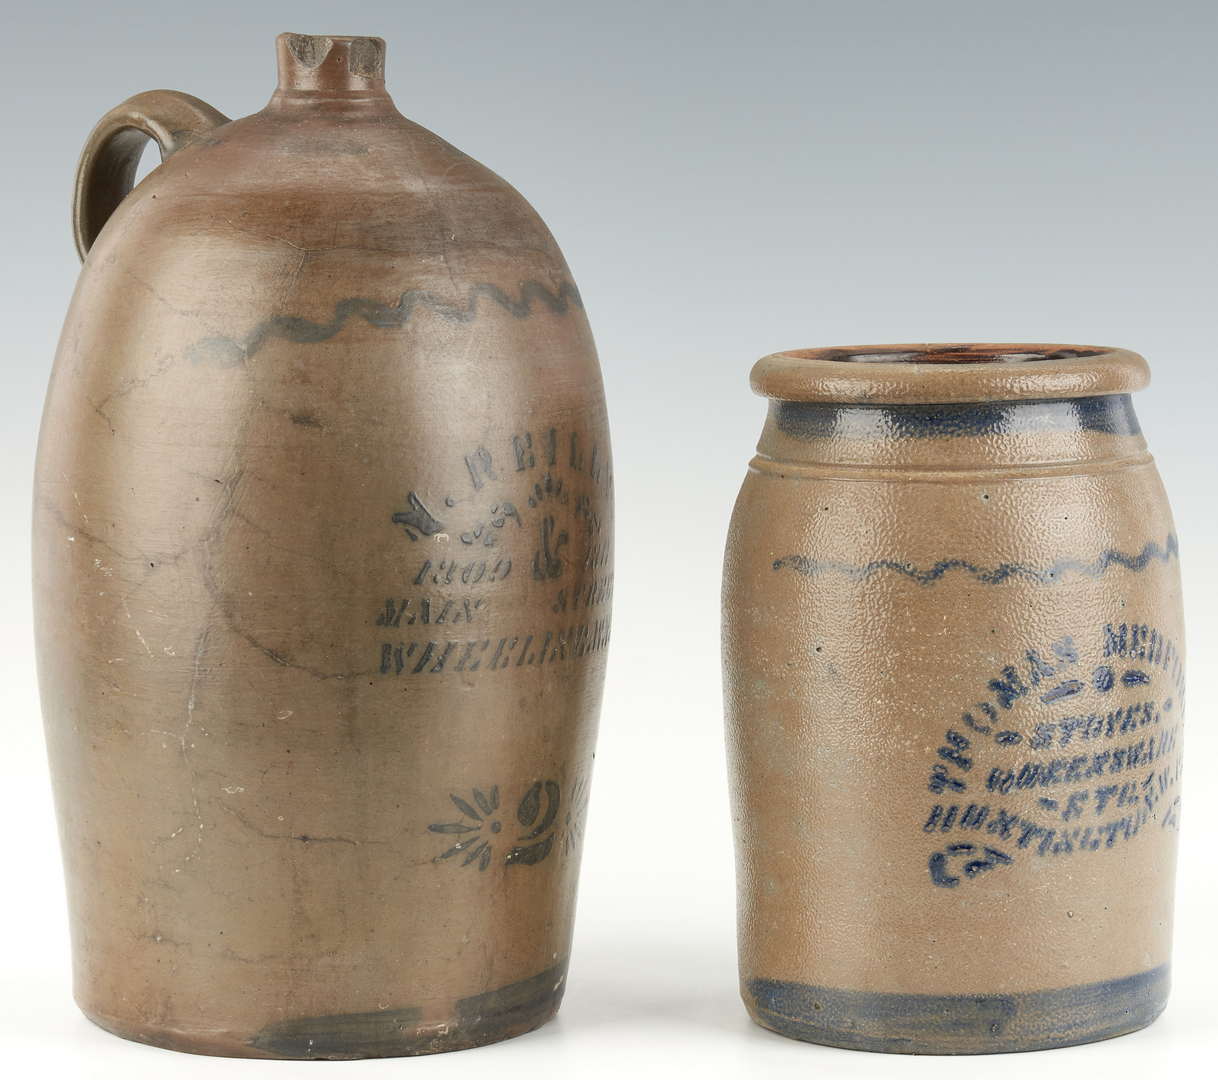 Lot 1070: WV Cobalt Decorated Stoneware Jug & Jar, Medford & Reilly, Two (2) Items